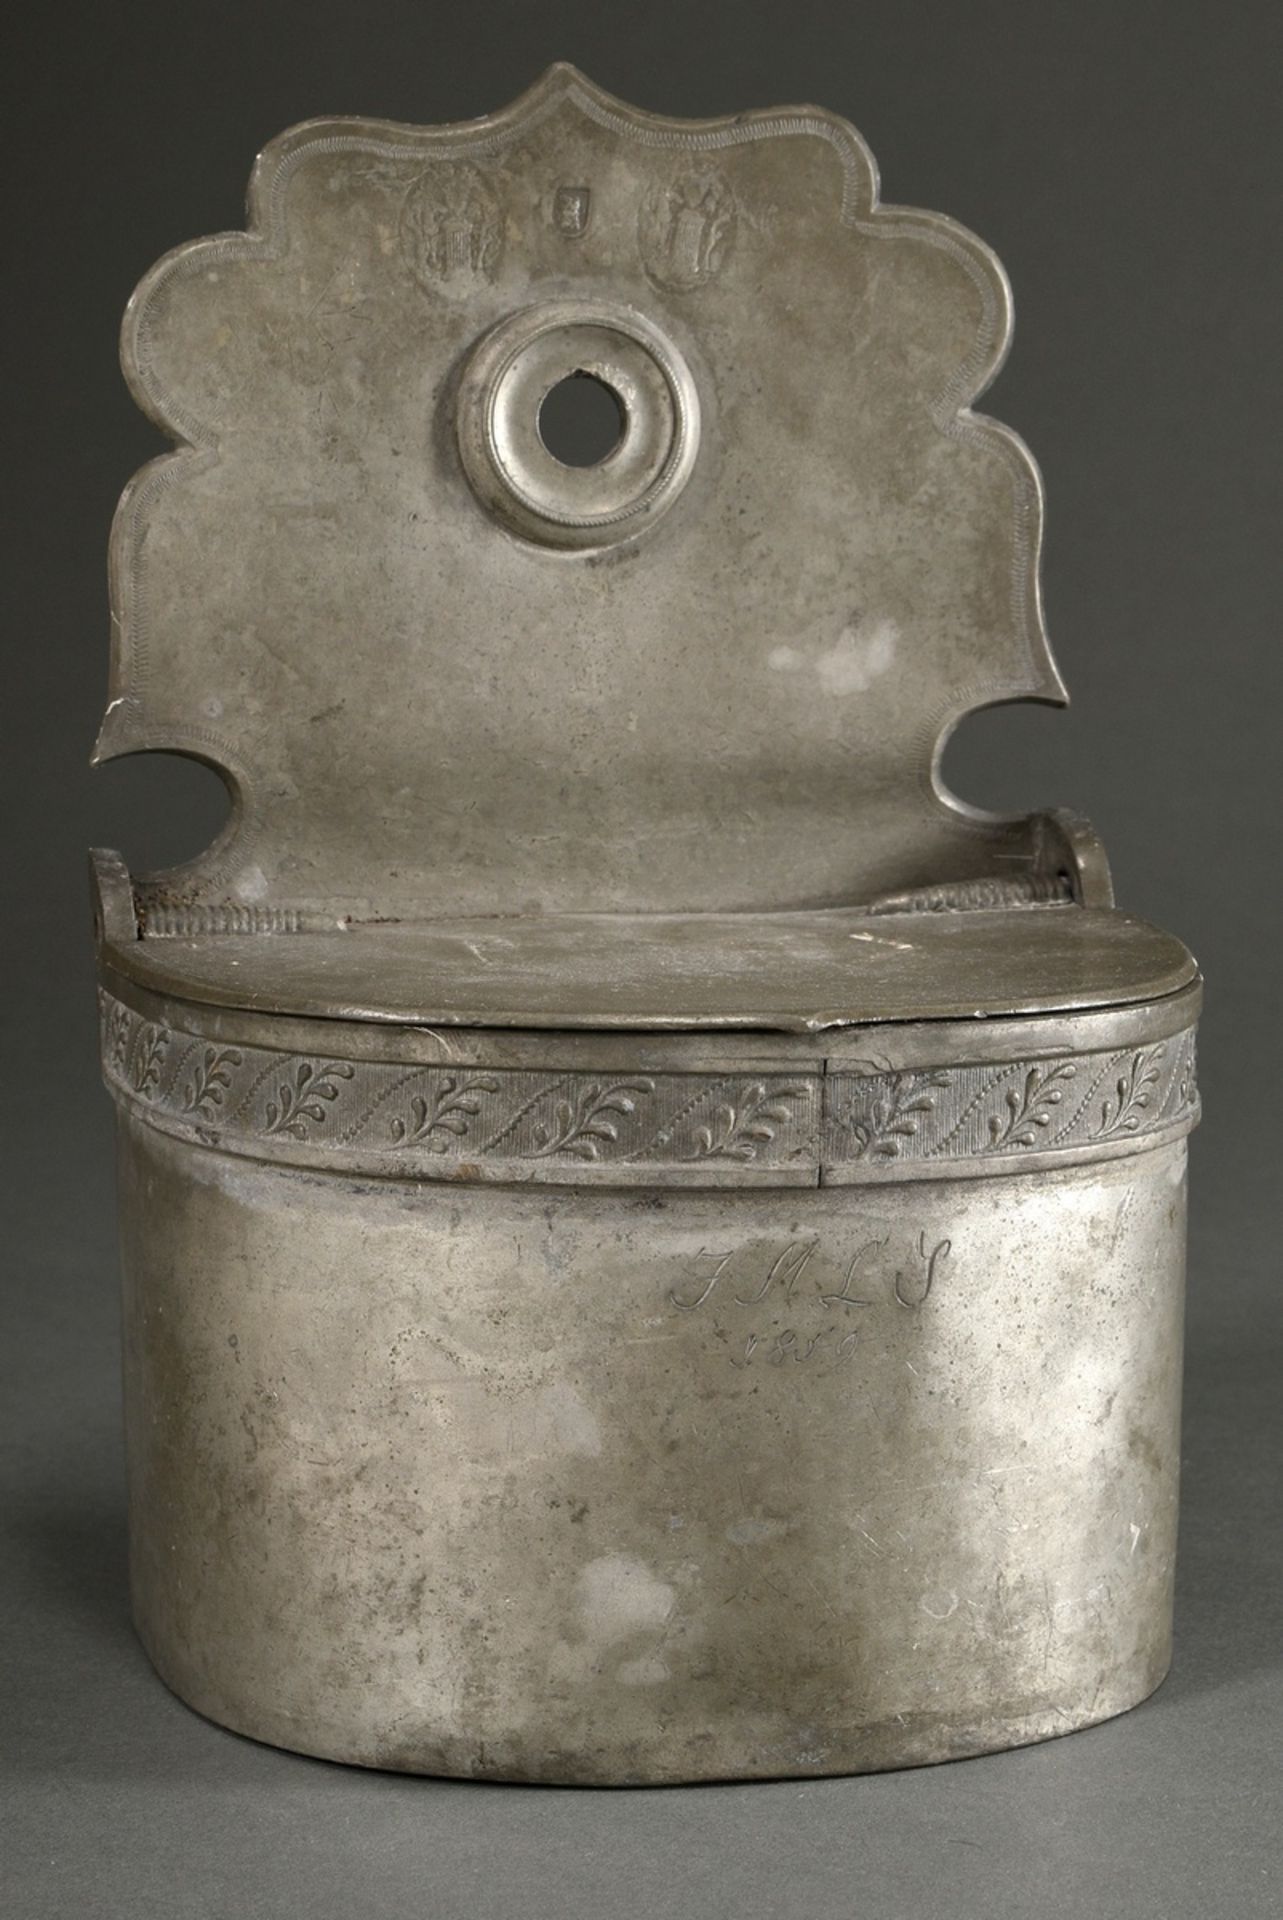 Pewter salt cellar with embossed floral frieze, engraved ‘JMLS 1859’ on the front, town mark probab